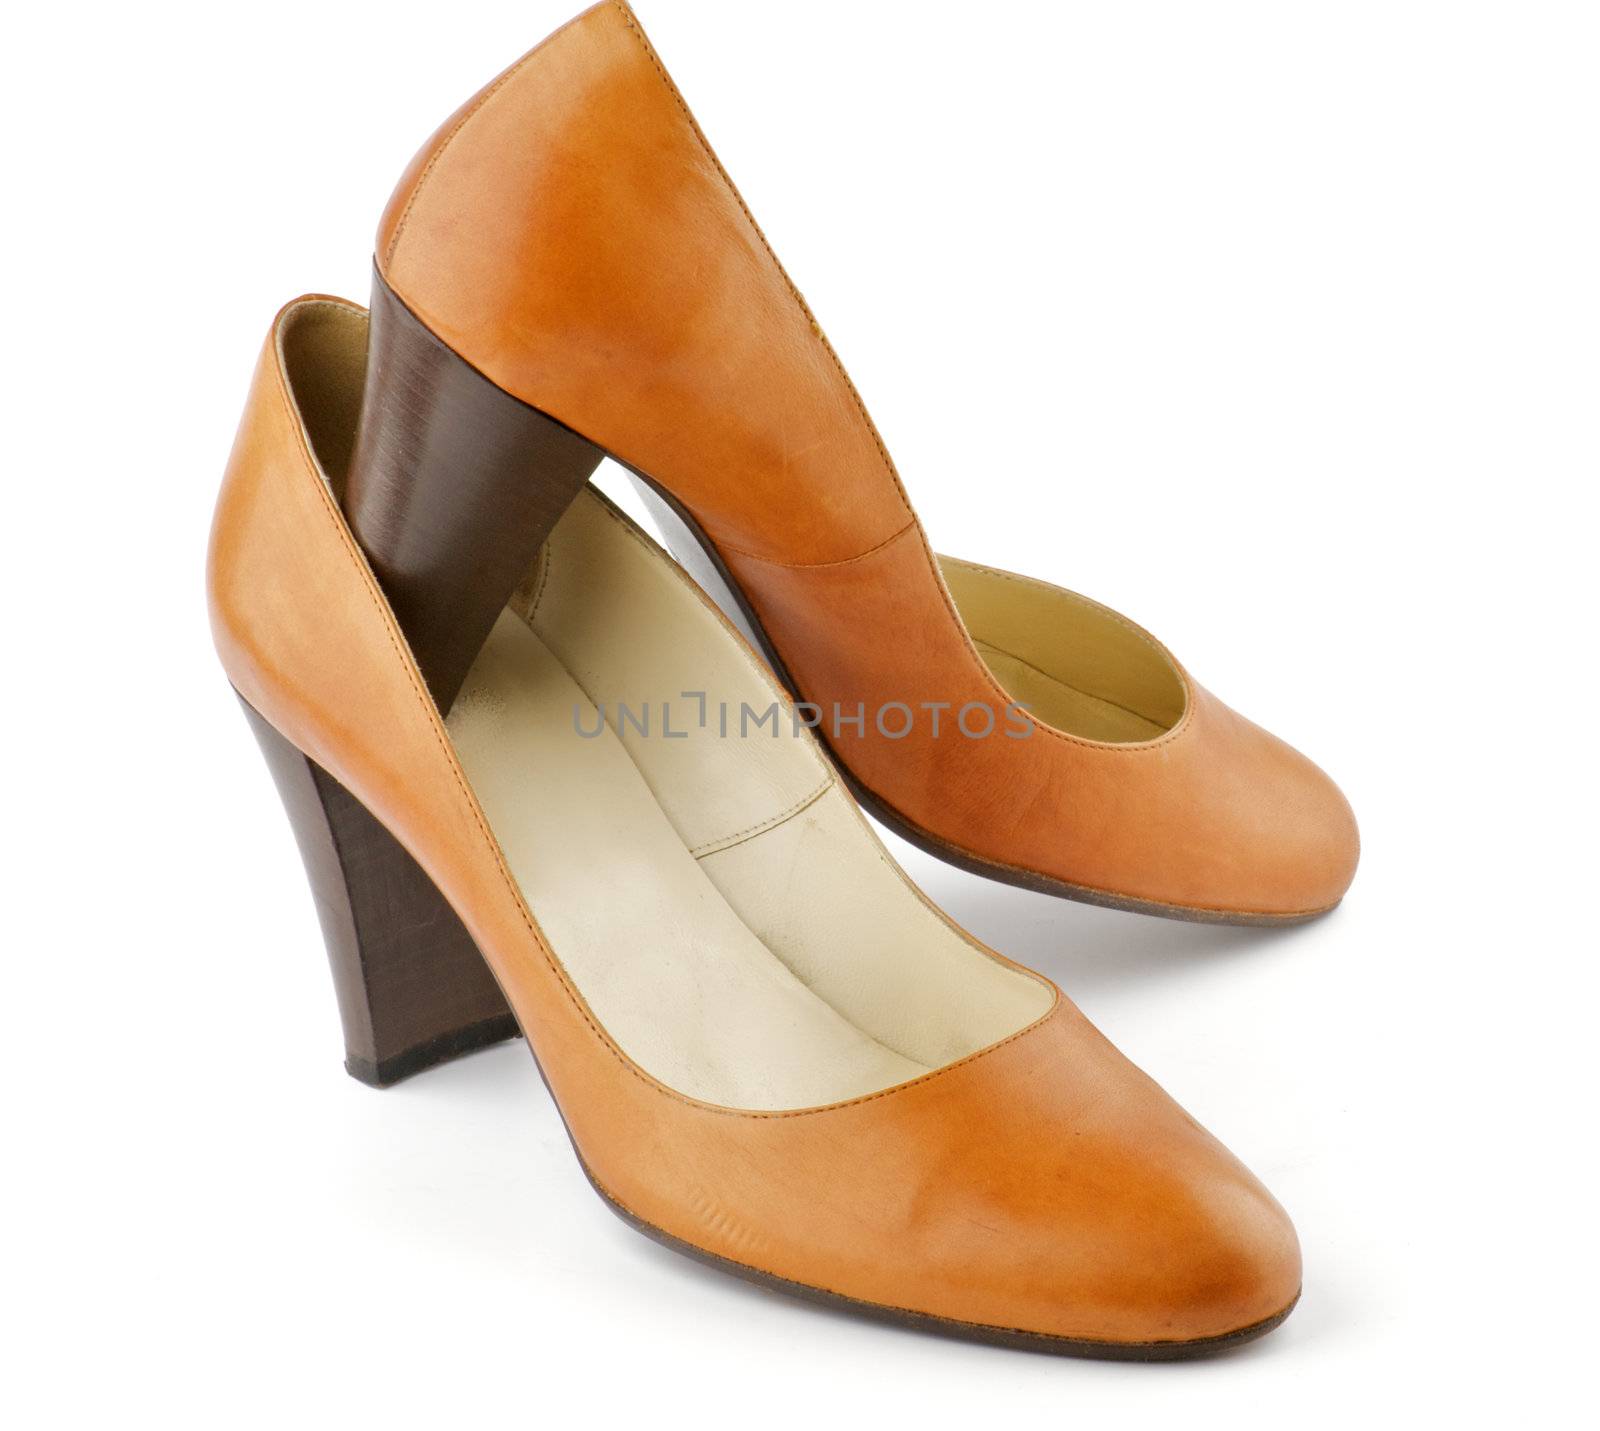 Ginger red color female shoes by zhekos